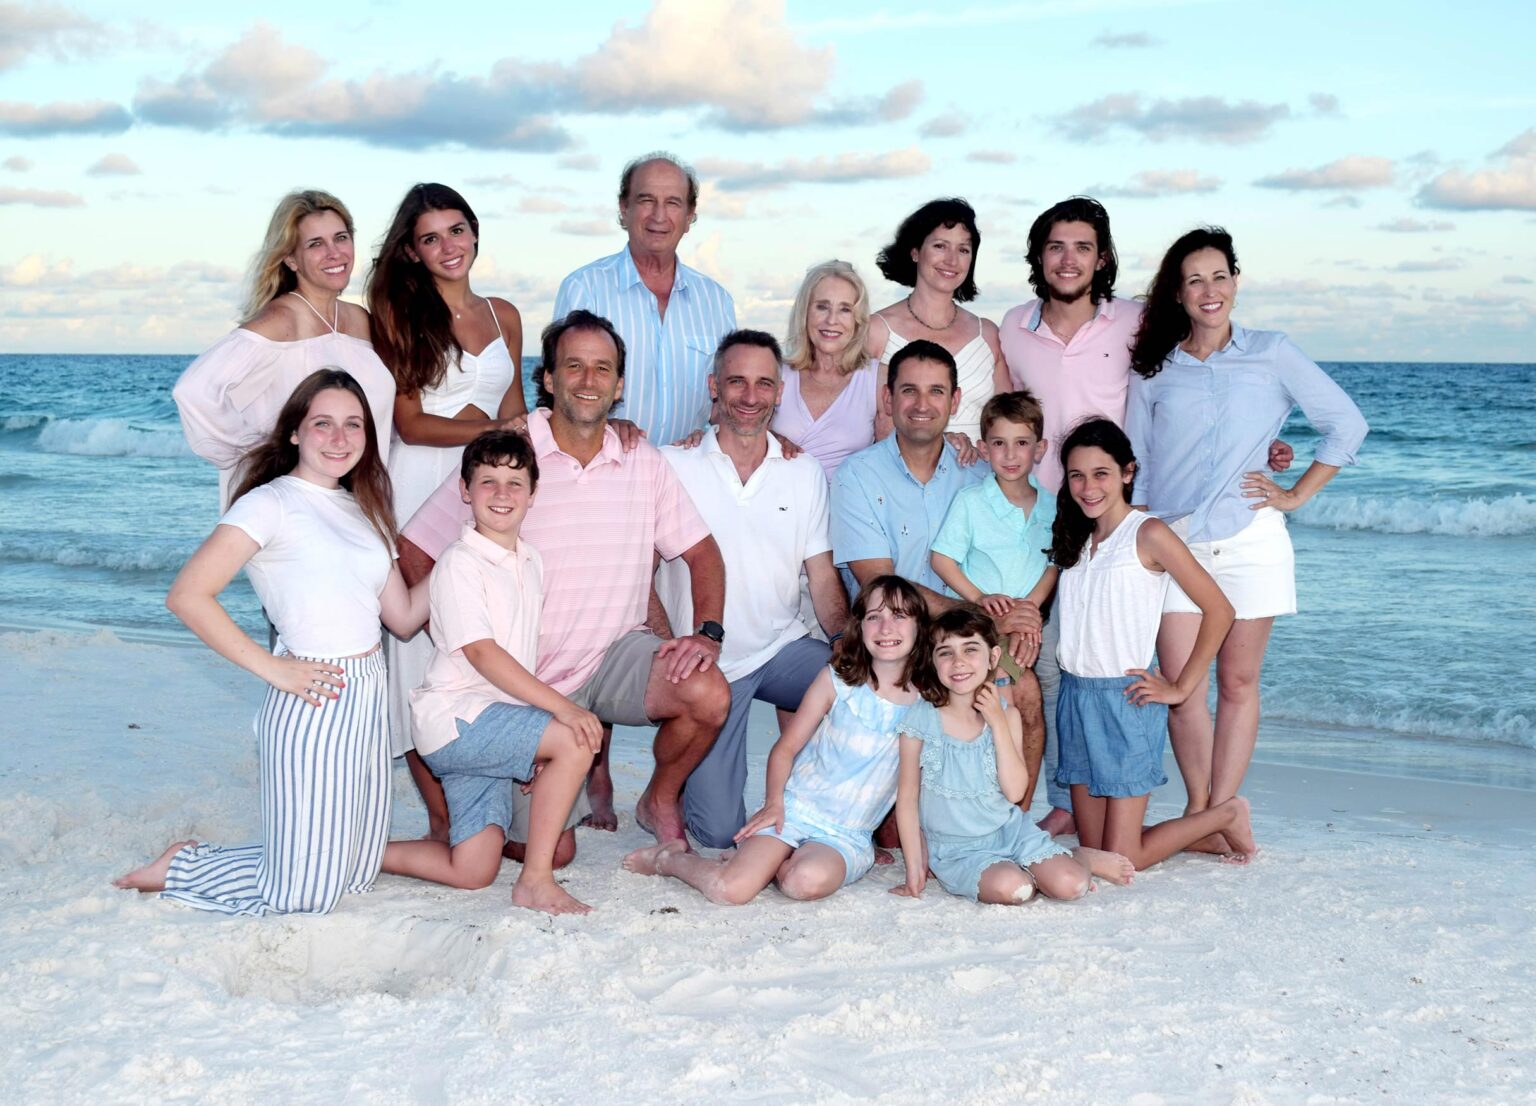 Family reunion portrait on the beach at sunset